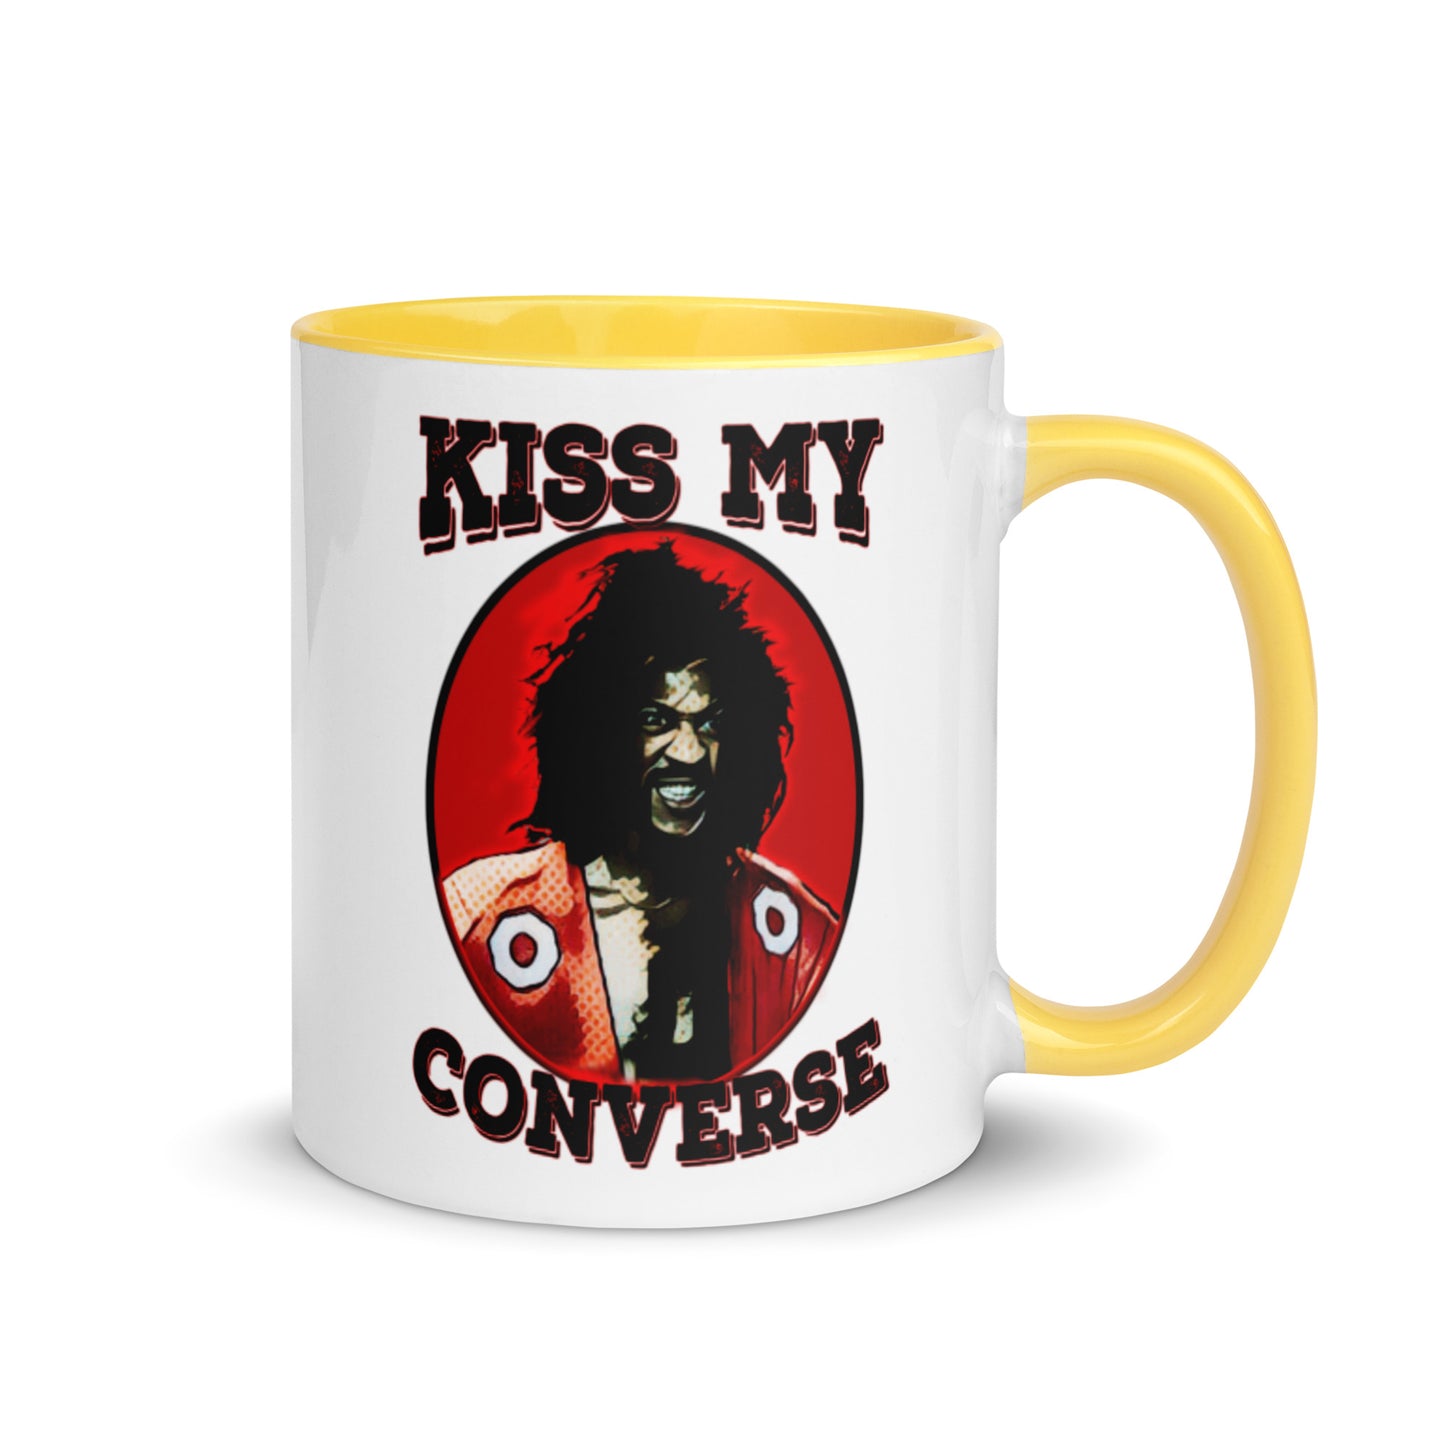 The Last Dragon Movie Quote Coffee Cup - "Sho'nuff!" - thenightmareinc